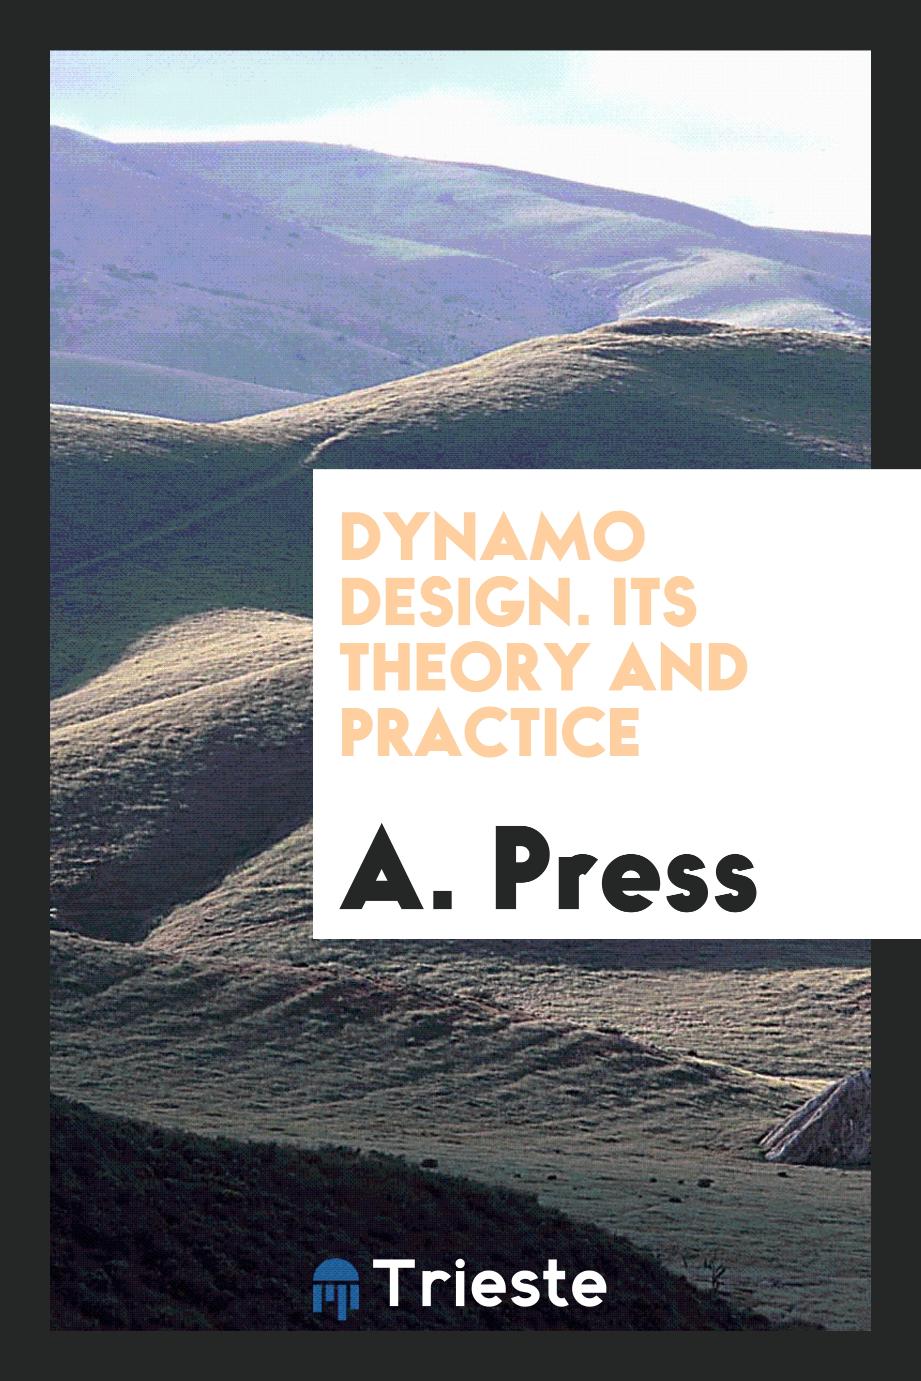 Dynamo Design. Its Theory and Practice